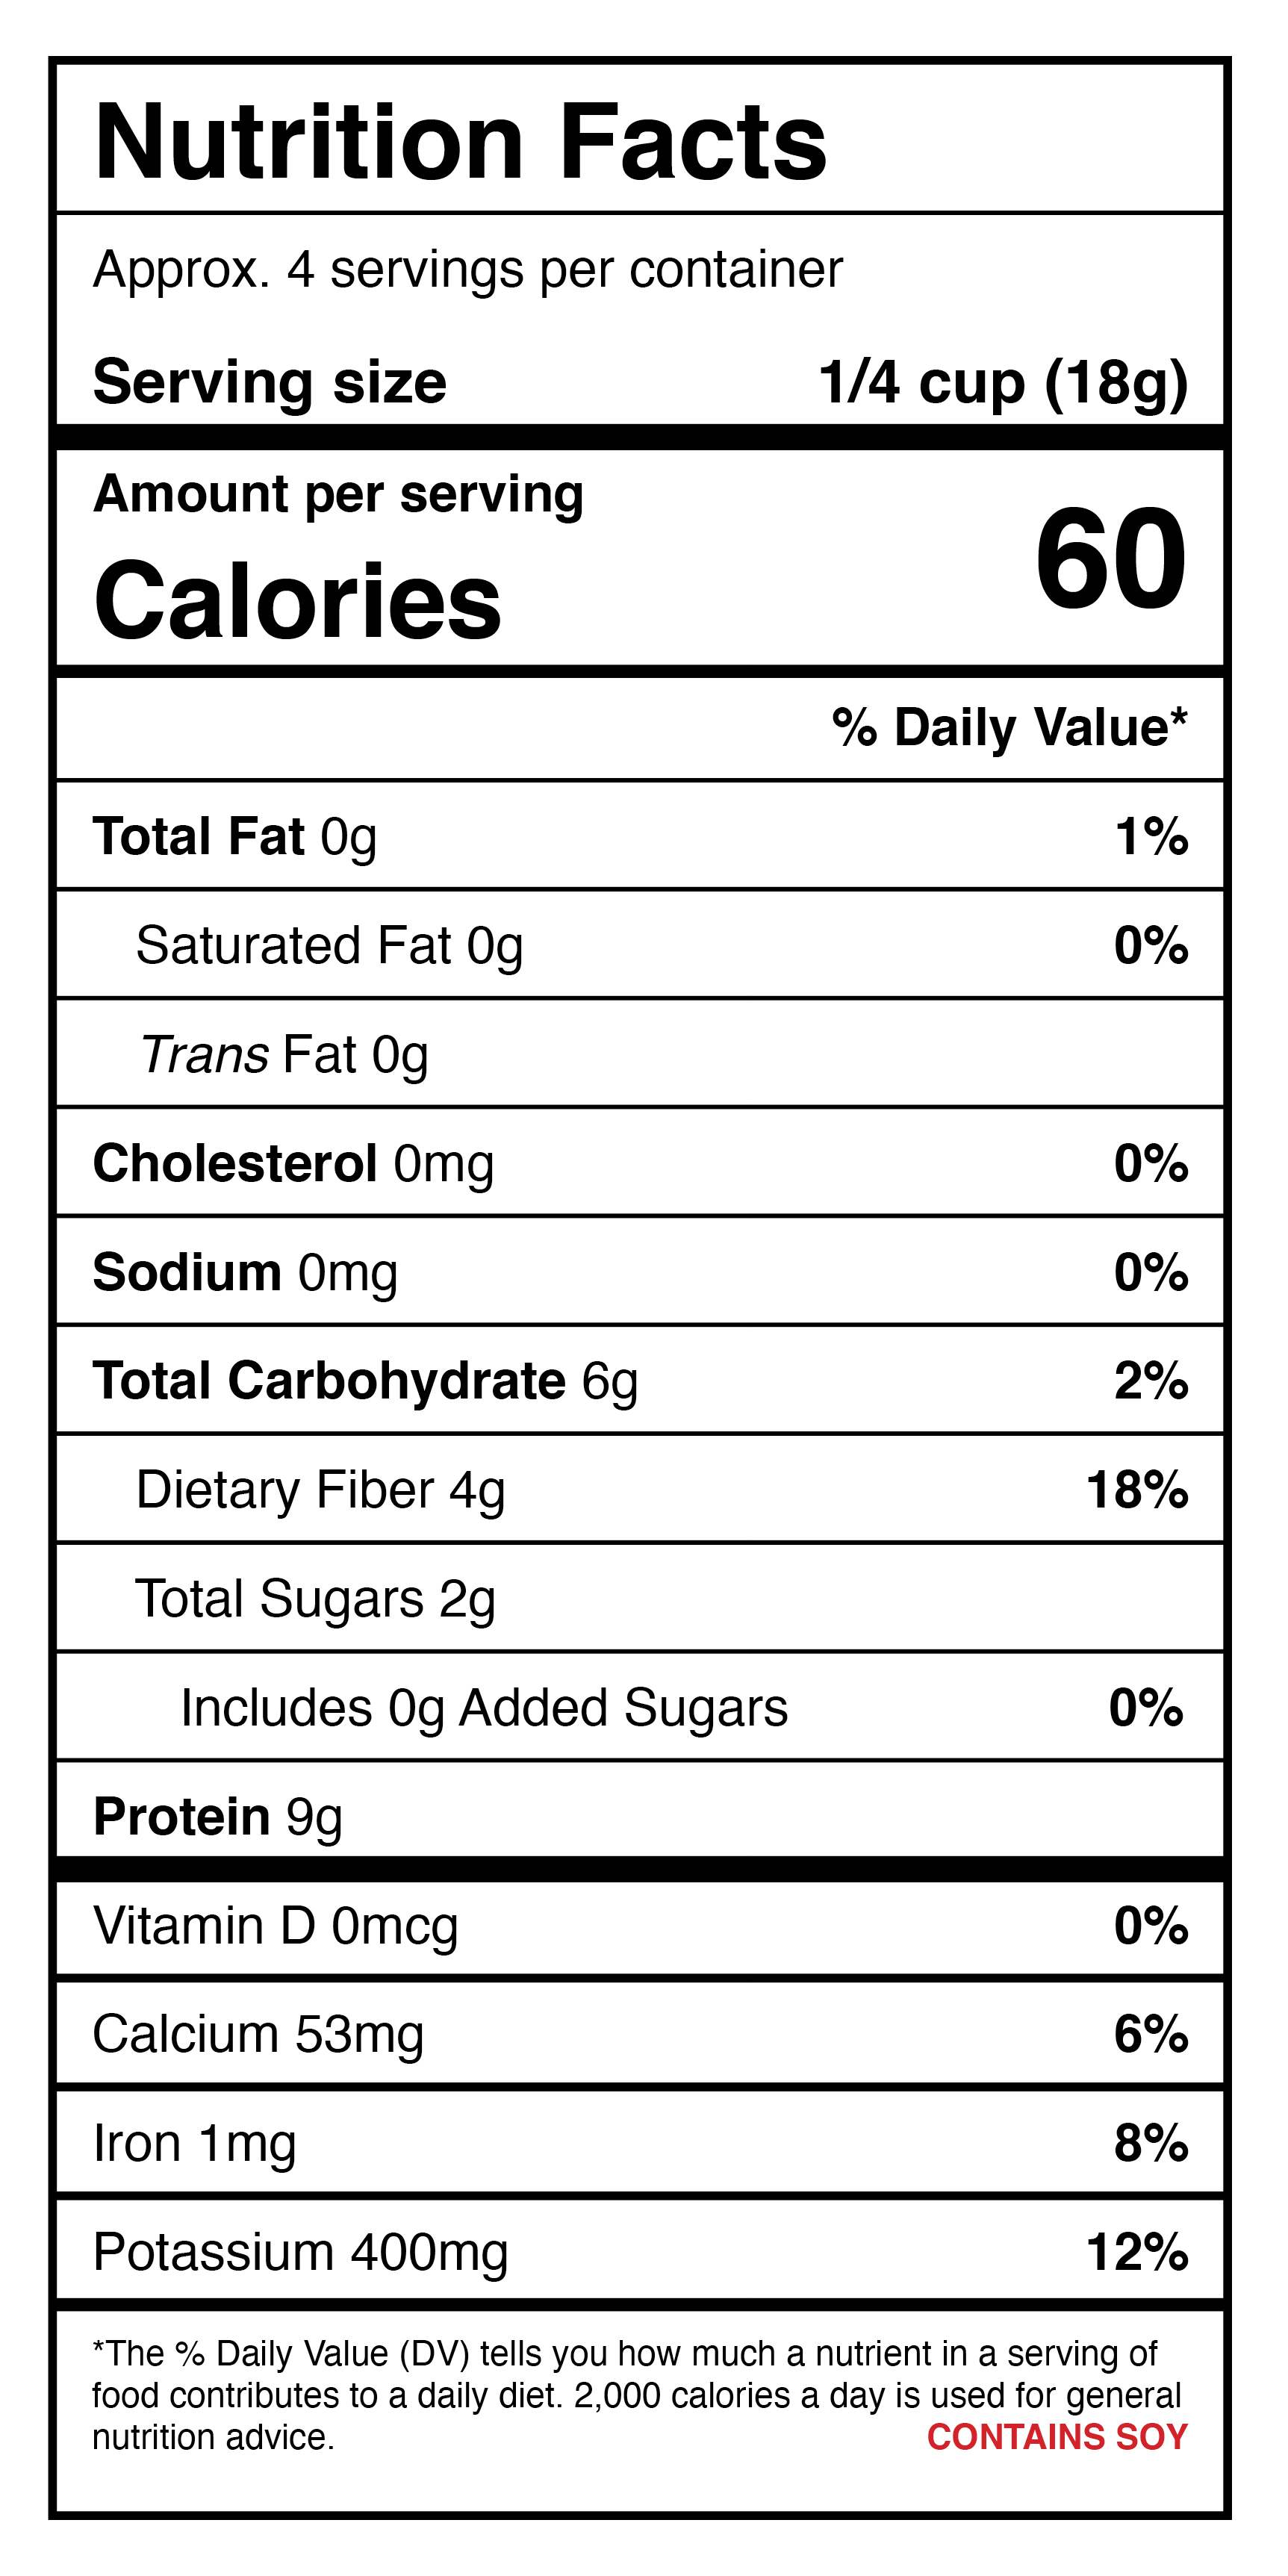 A nutrition label for an unflavored protein shake.